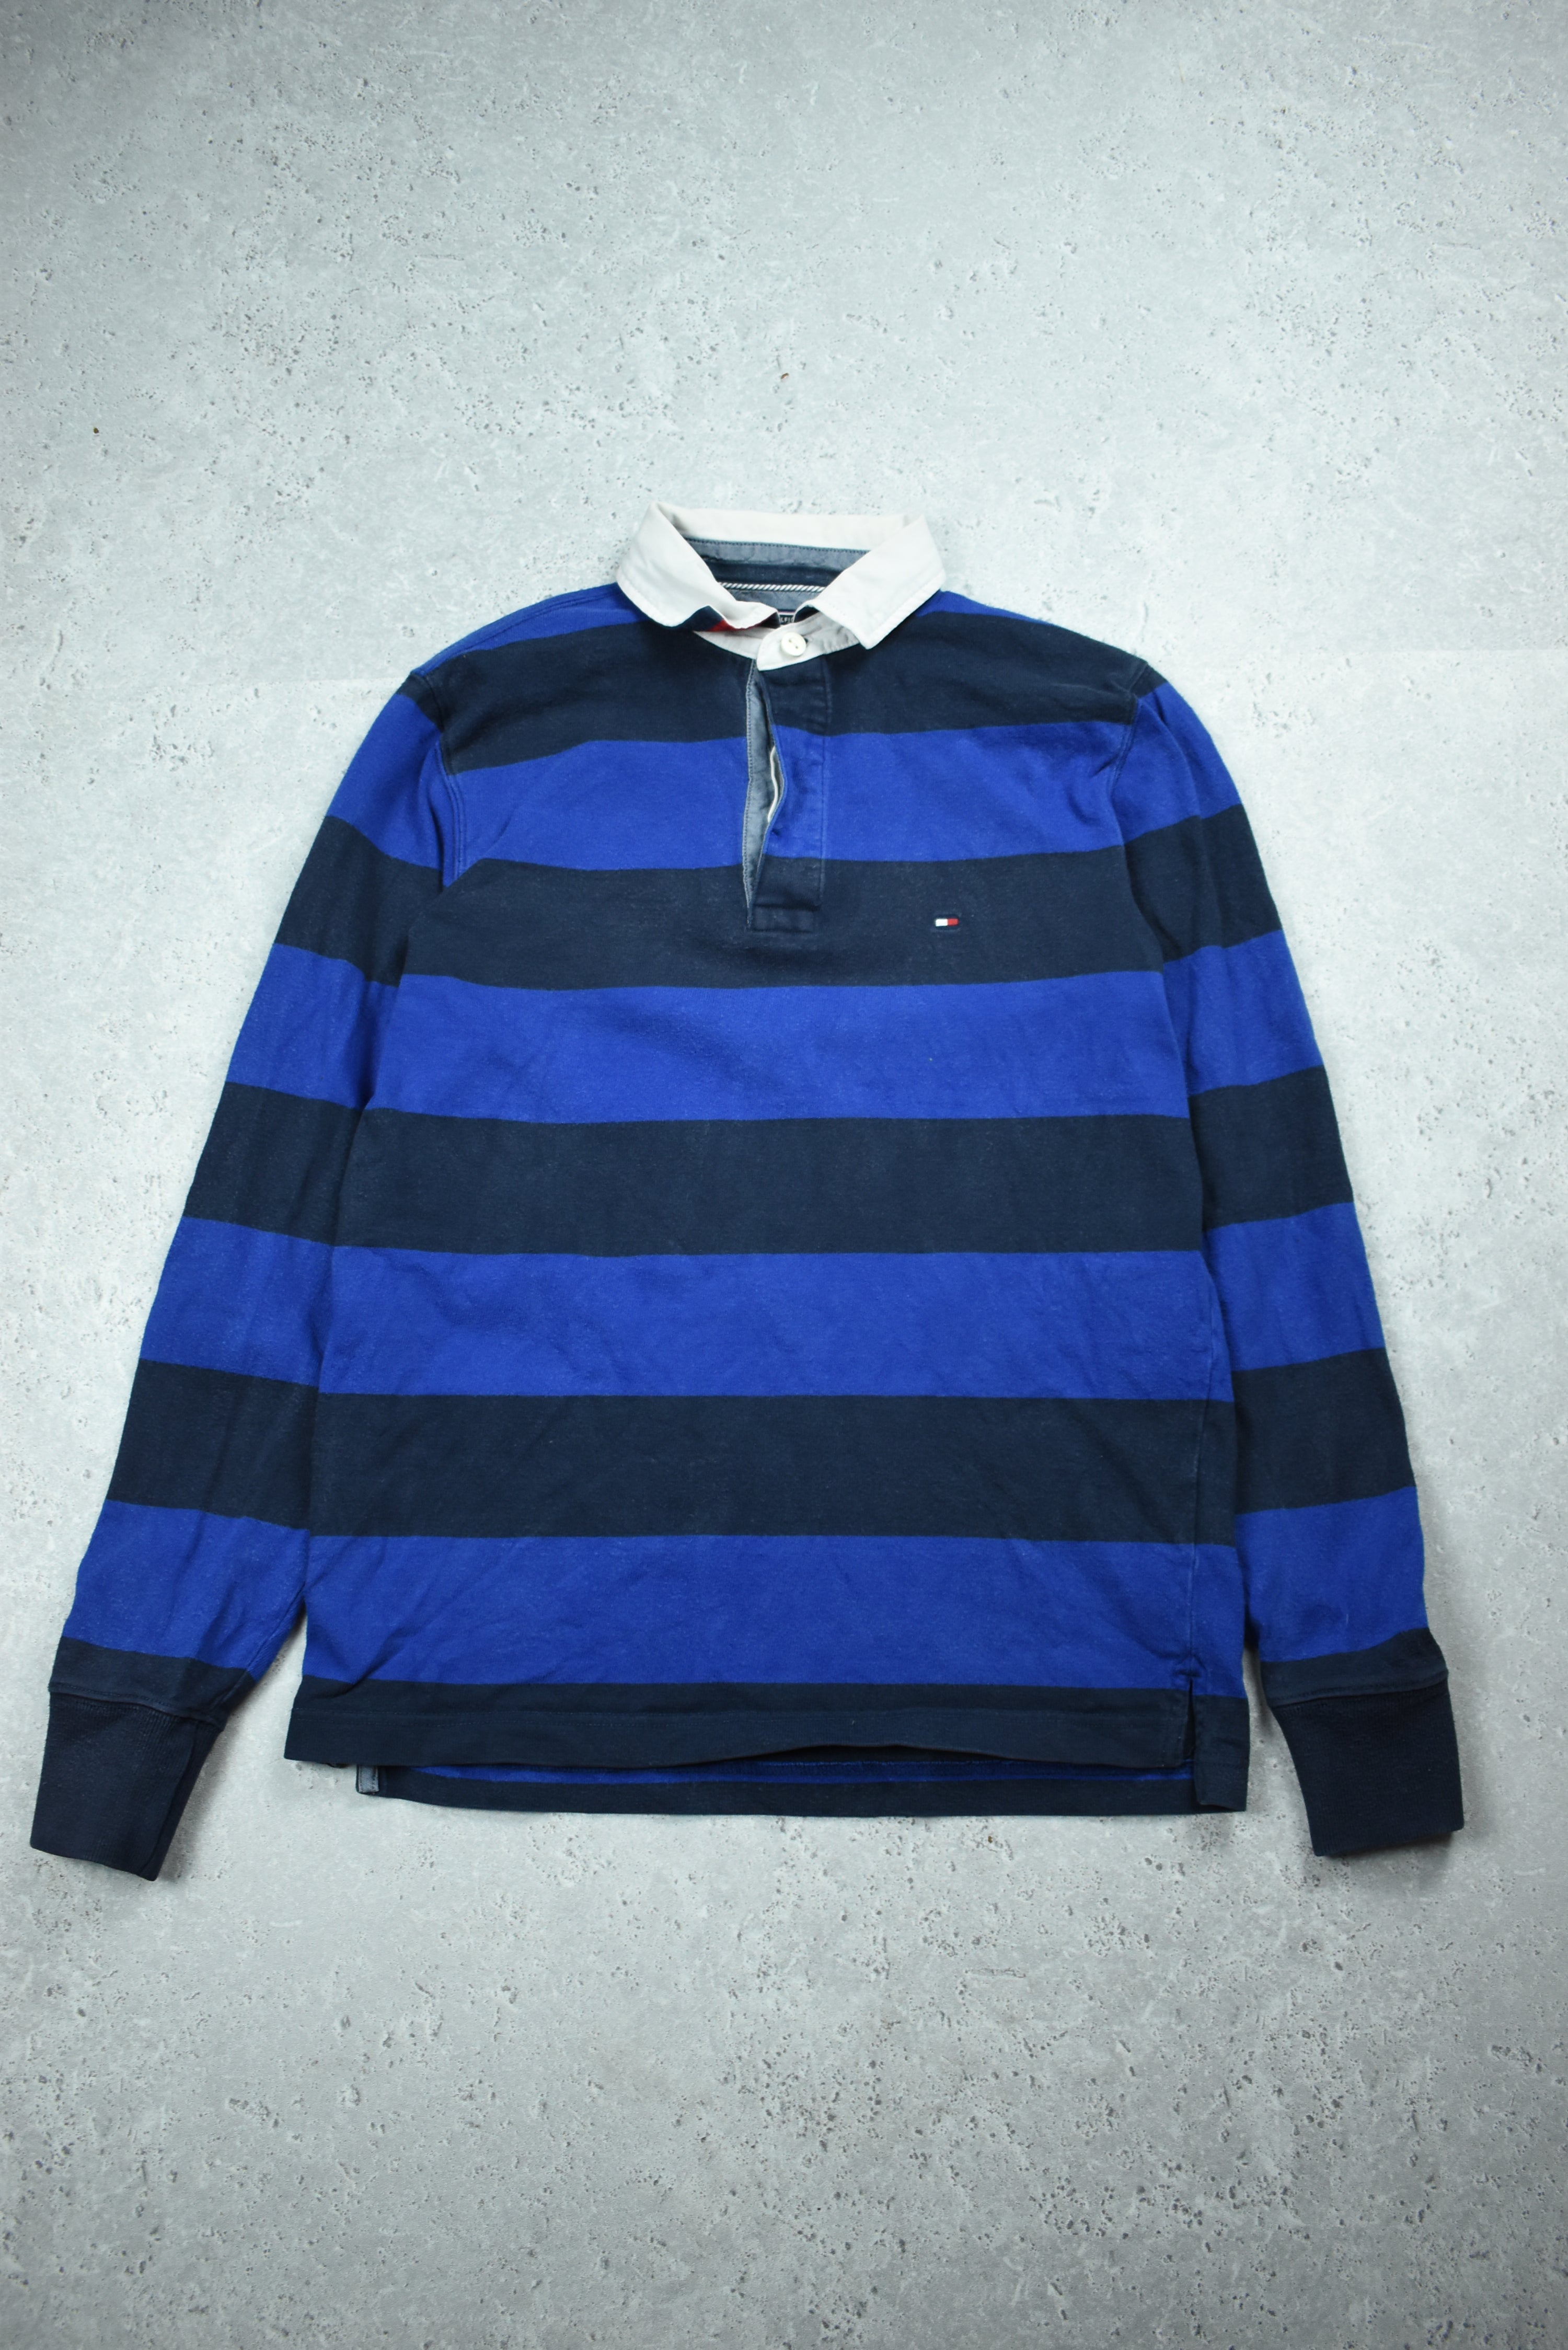 Vintage Tommy Hilfiger Rugby Polo Small